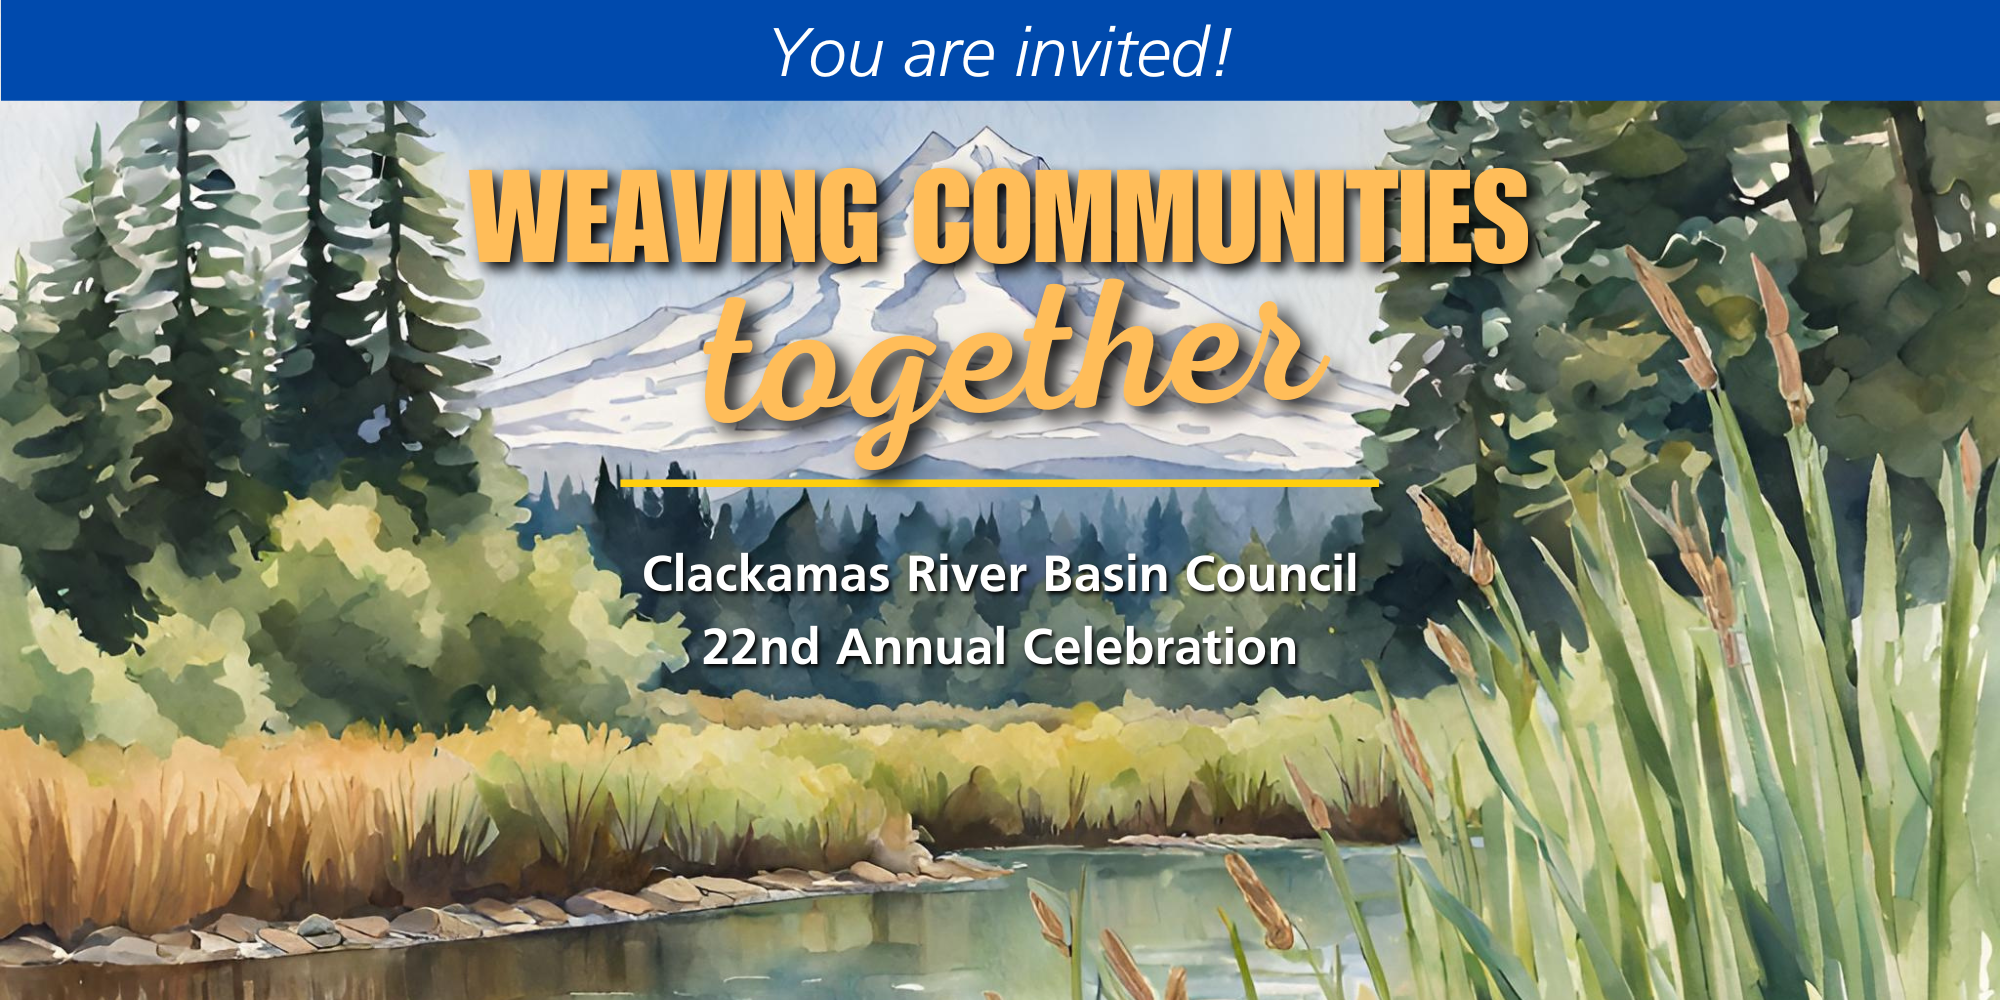 Annual Clackamas Watershed Celebration. Theme is weaving communities together.